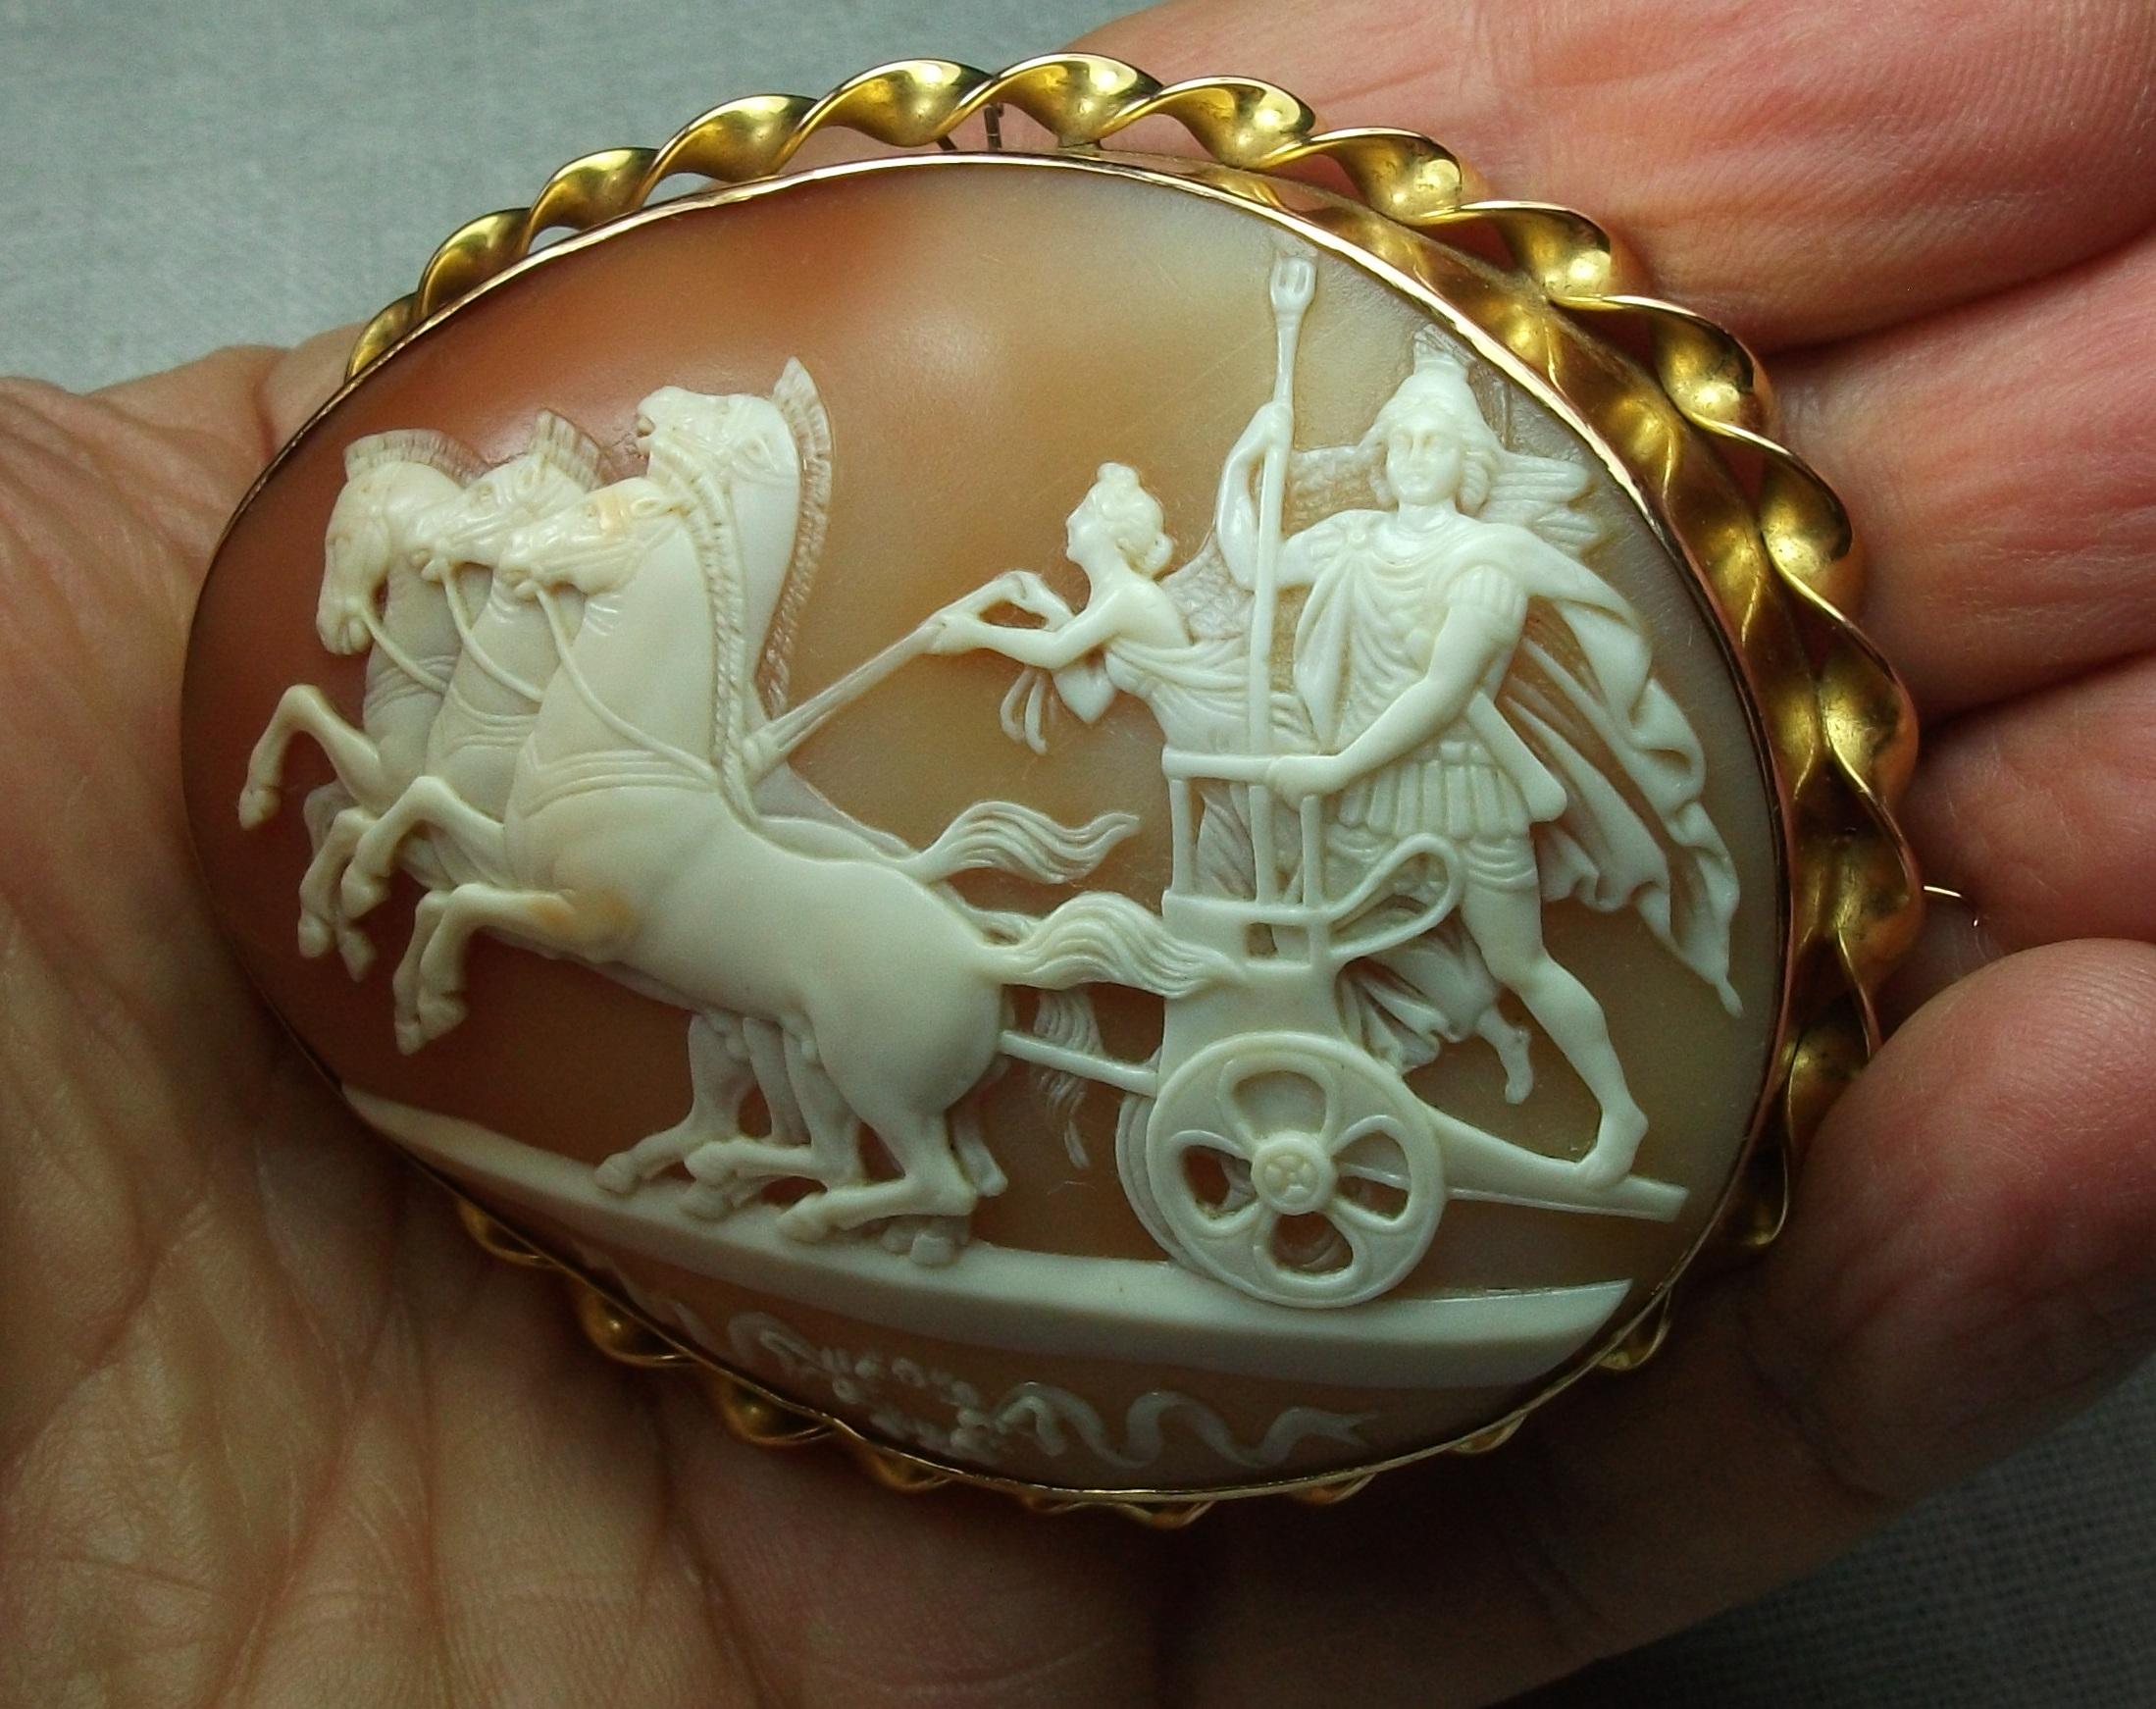 This is a Museum Quality shell cameo brooch depicting a rare subject, Alexander the Great in his Triumphal Chariot companied by Nike, the Goddess of Victory, entering in Babylon. The carver just reproduced all the details of the sculpture on this